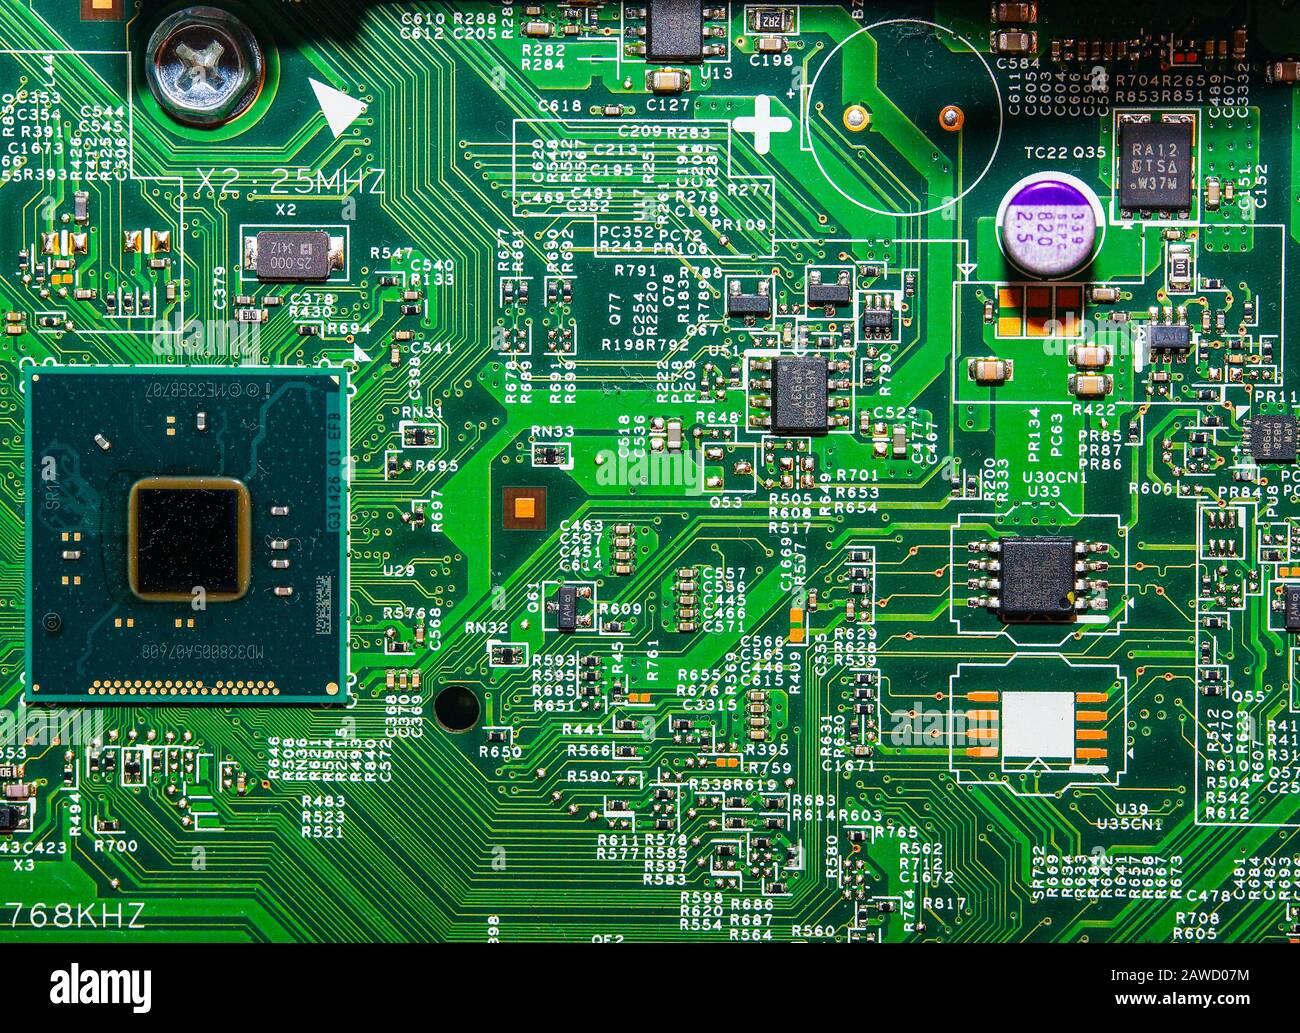 Circuit board on a motherboard Stock Photo